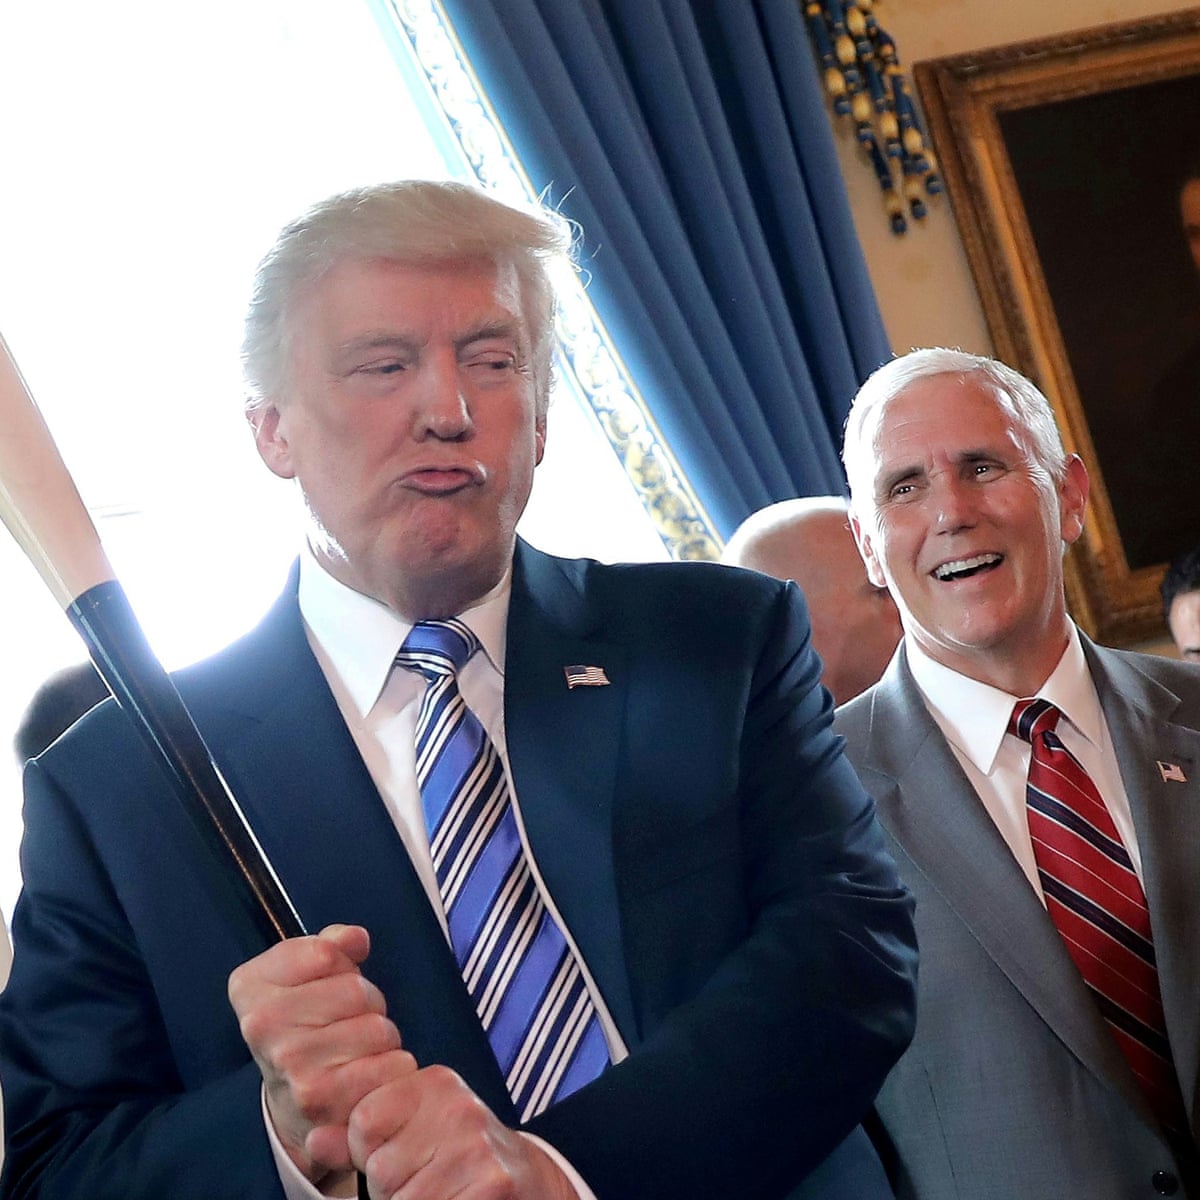 Trump and Carlson lead backlash as MLB pulls All-Star Game from